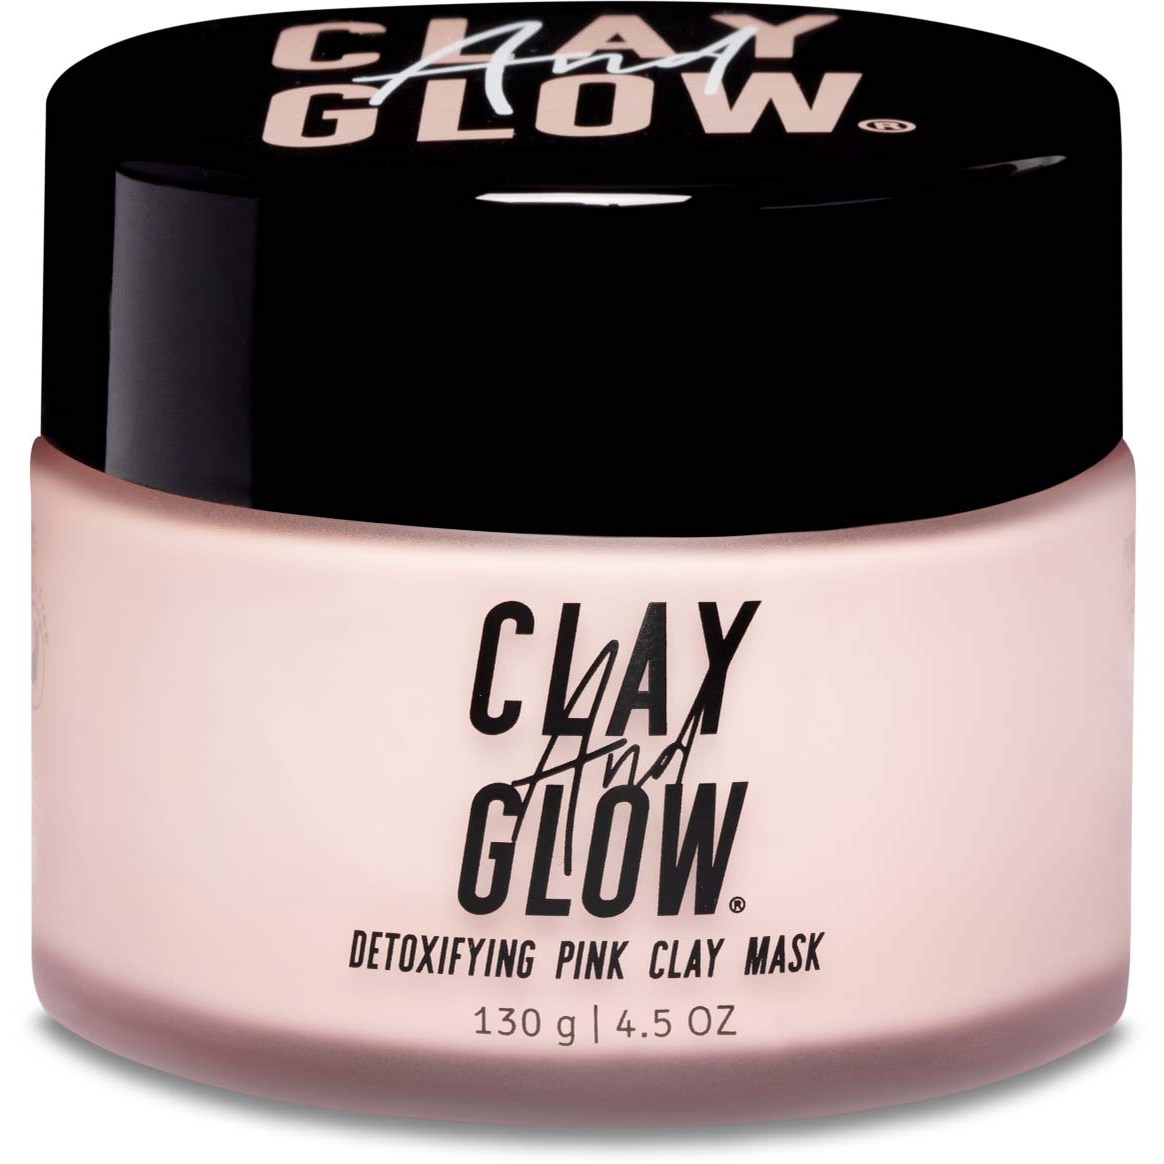 Läs mer om Clay And Glow Pink Clay Mask 130 g